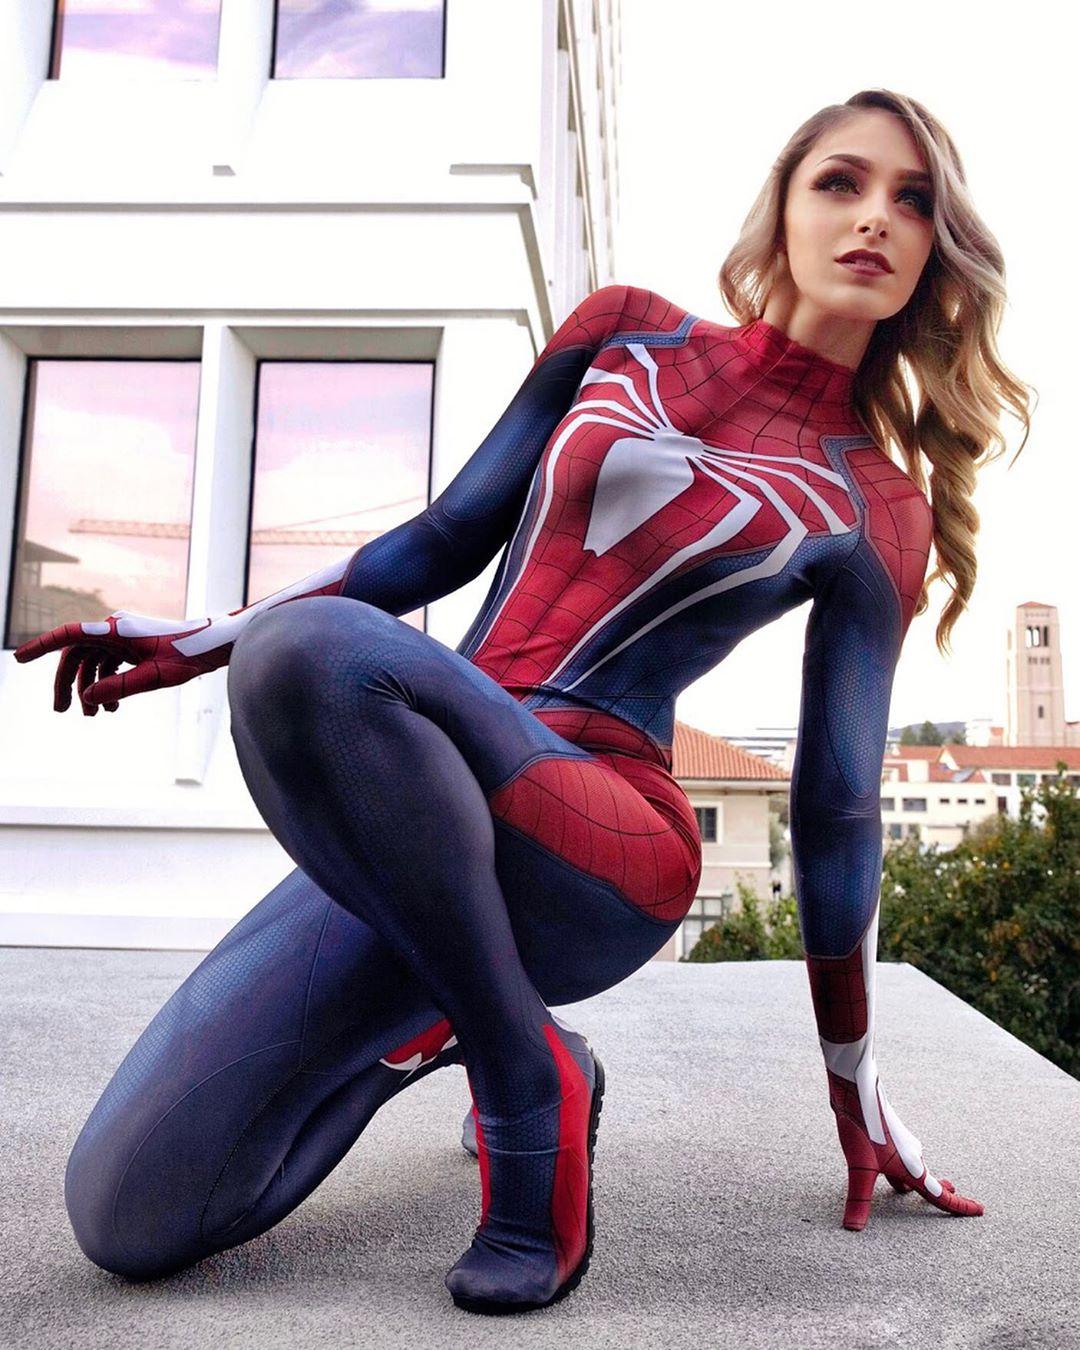 51 Hot Pictures Of Spider-Girl Are Windows Into Paradise 50